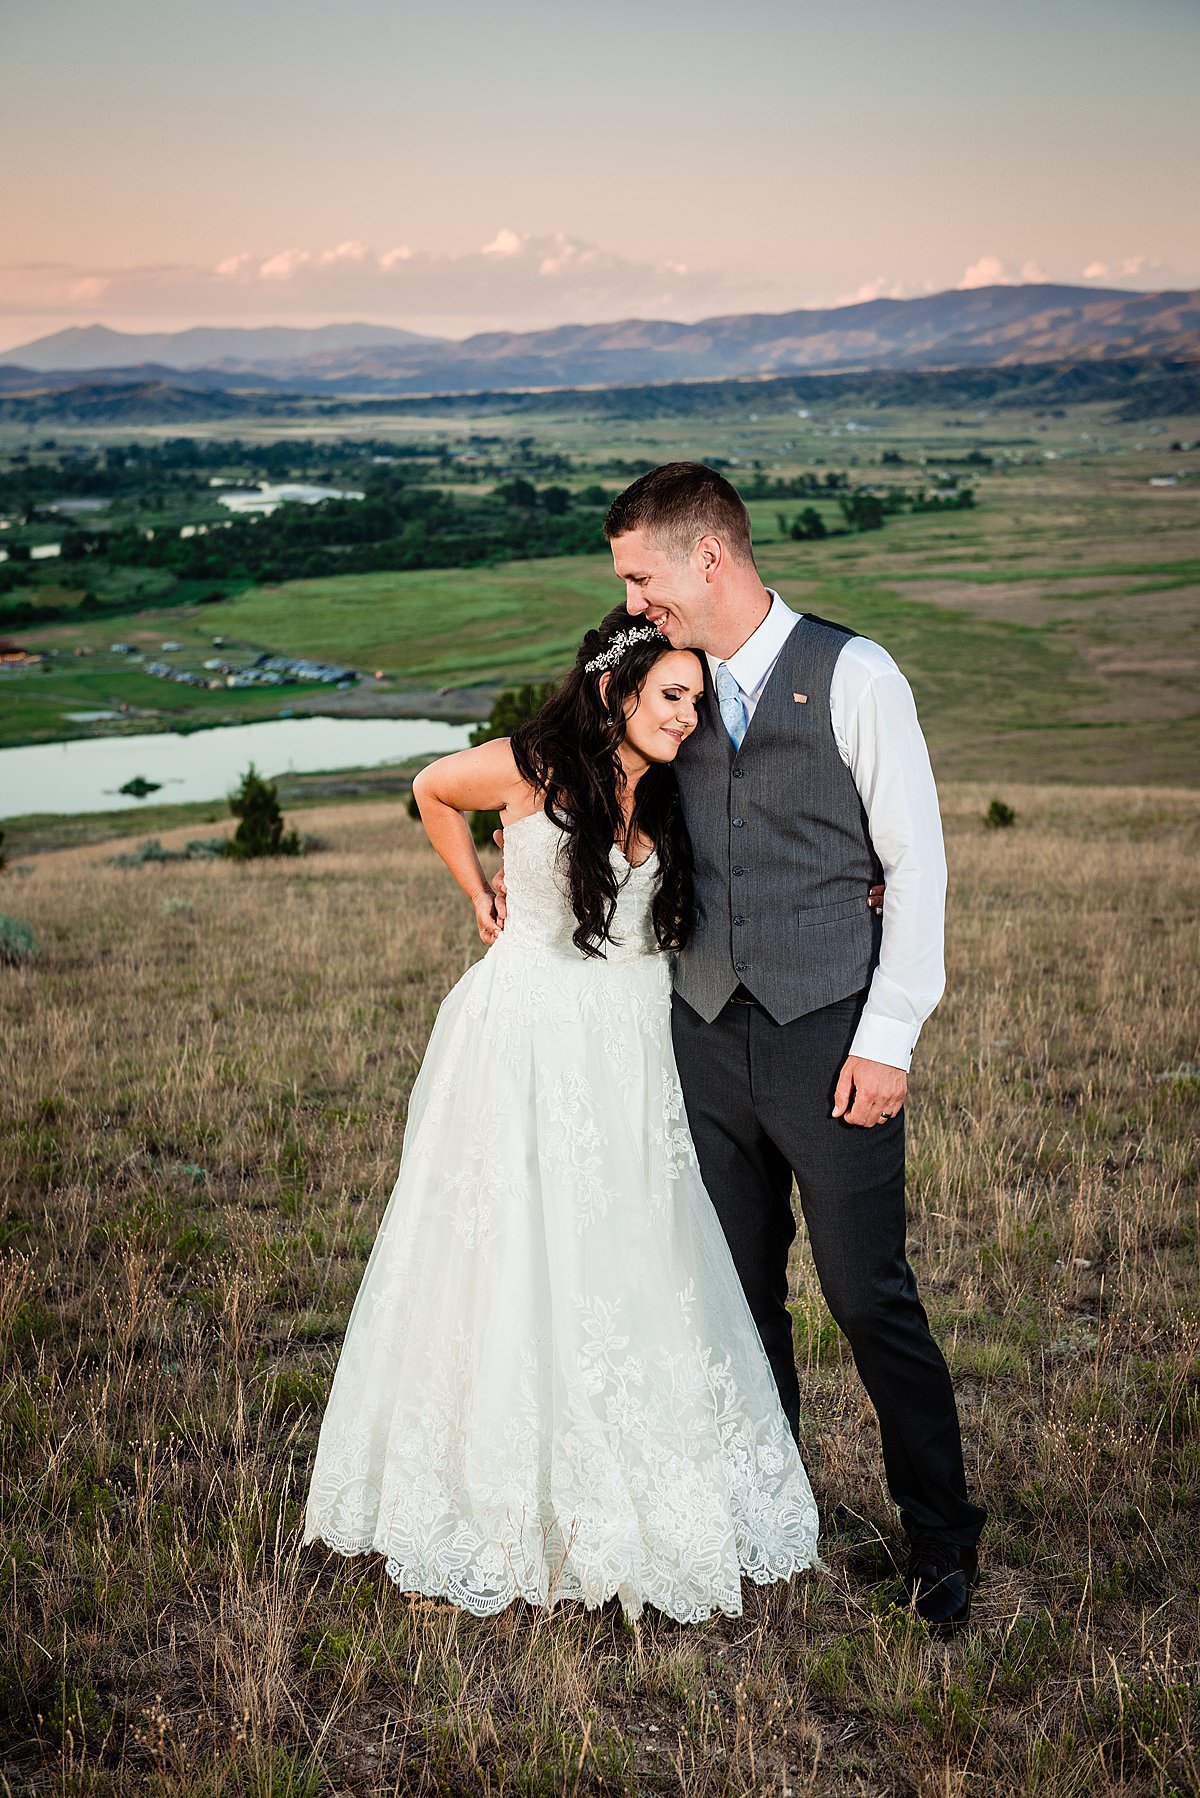 Romantic moment of couple snuggled together on the hill side overlooking the mountains in Montana